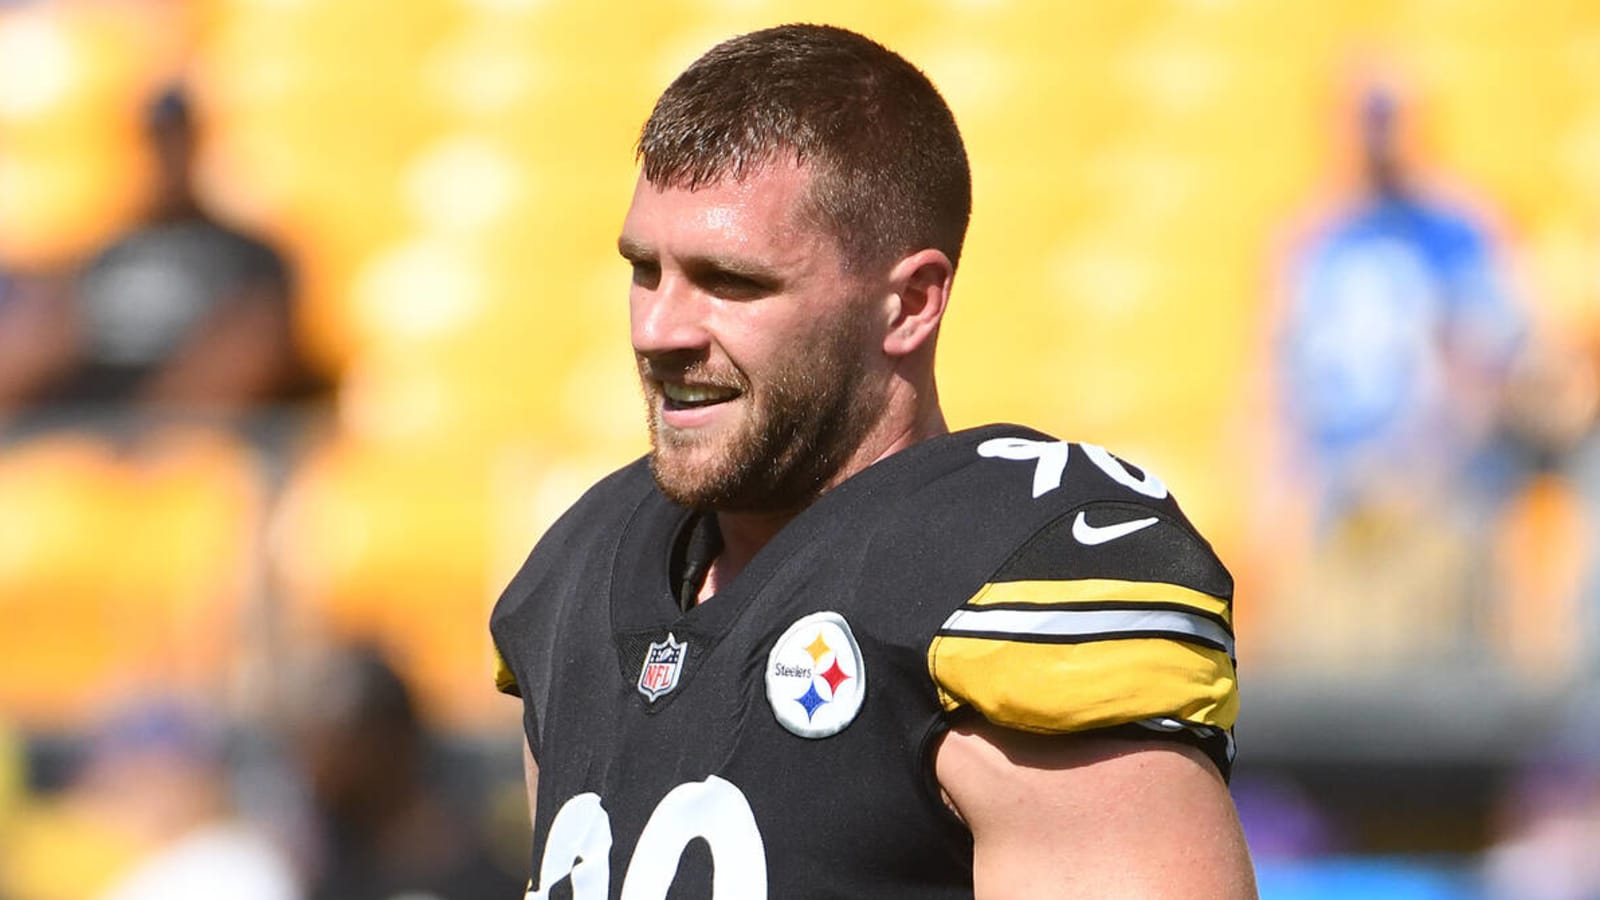 NFL writer: Steelers can continue playoff run without T.J. Watt